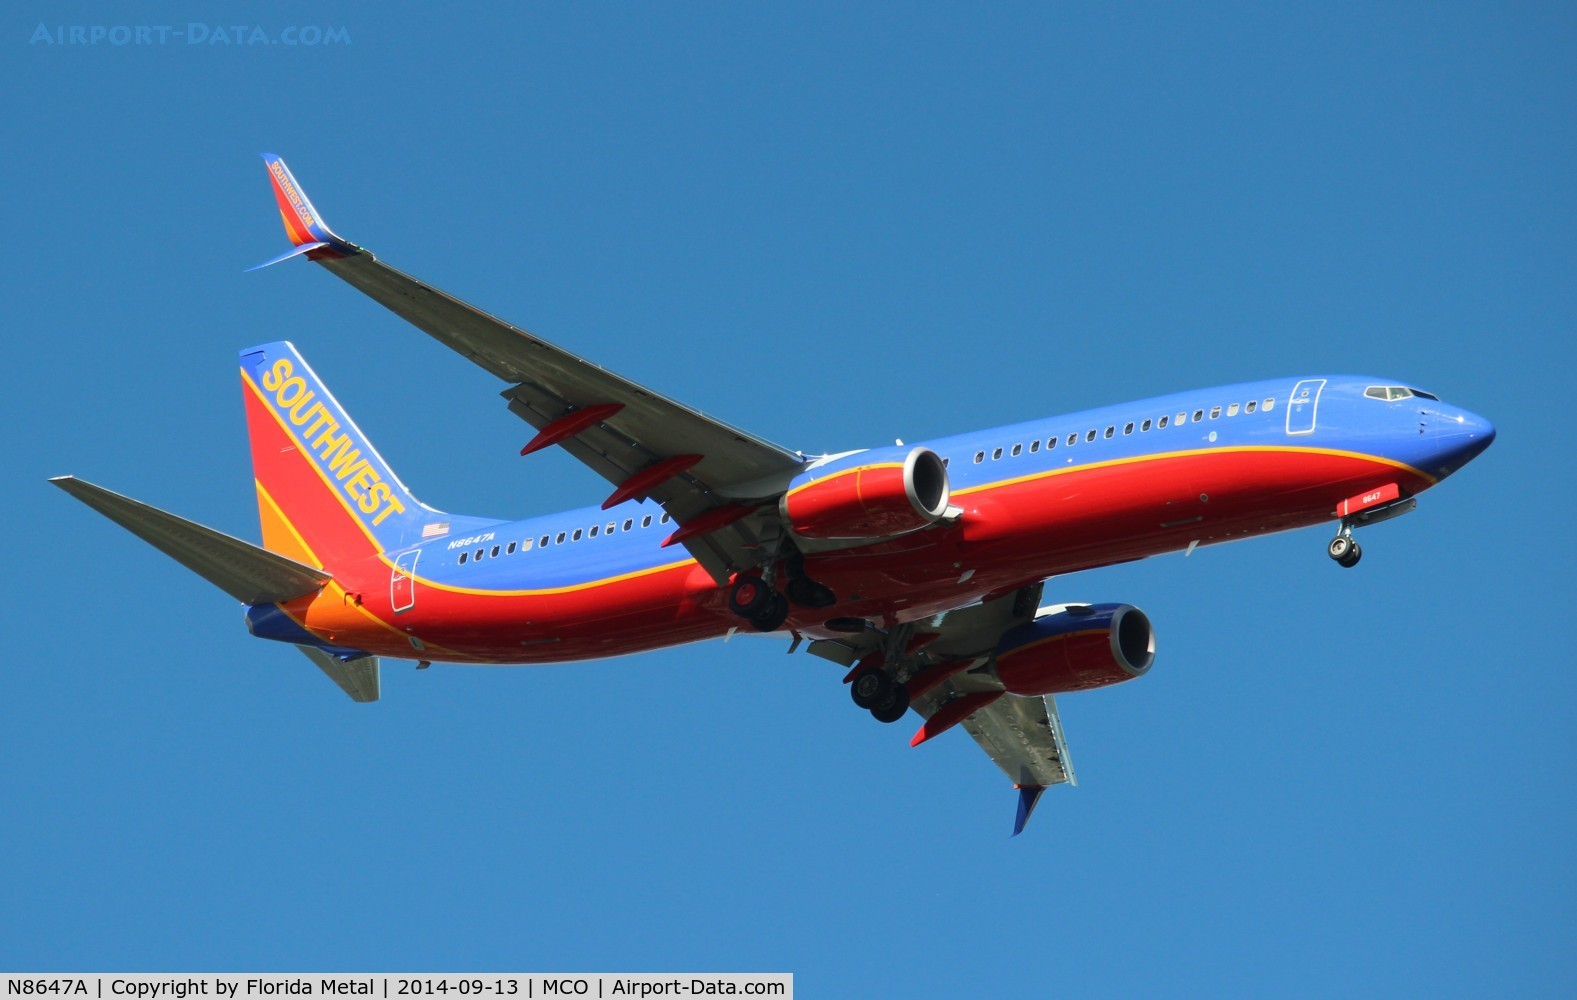 N8647A, 2014 Boeing 737-8H4 C/N 42528, Not even a month old when I took this - new Southwest 737-800 with split scimitar winglets